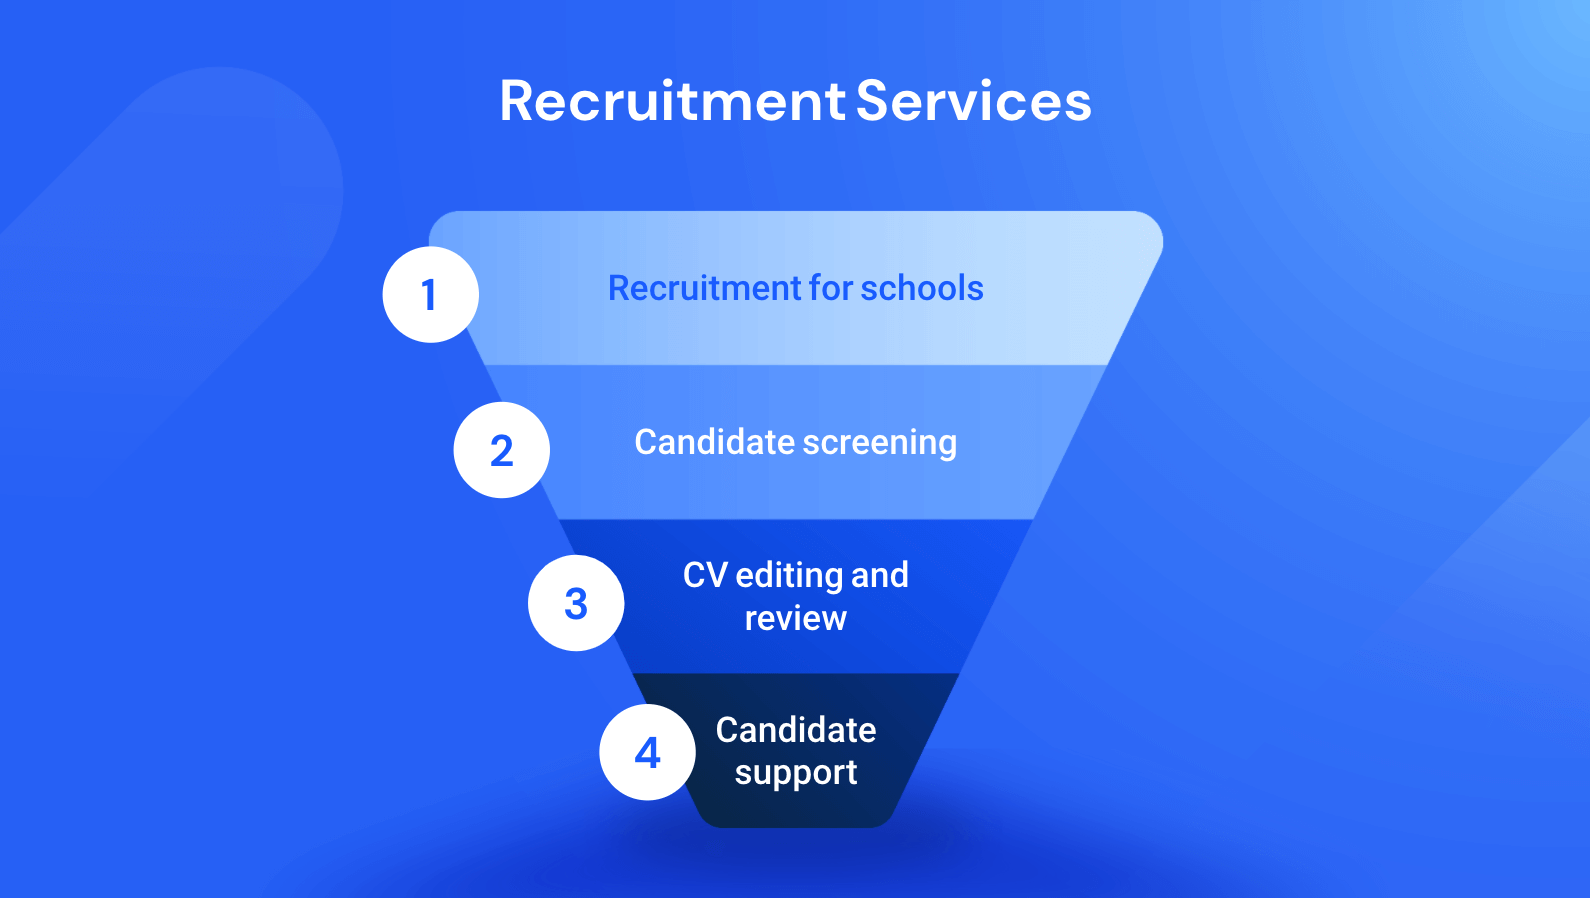 Recruitment services website hierarchy graphic